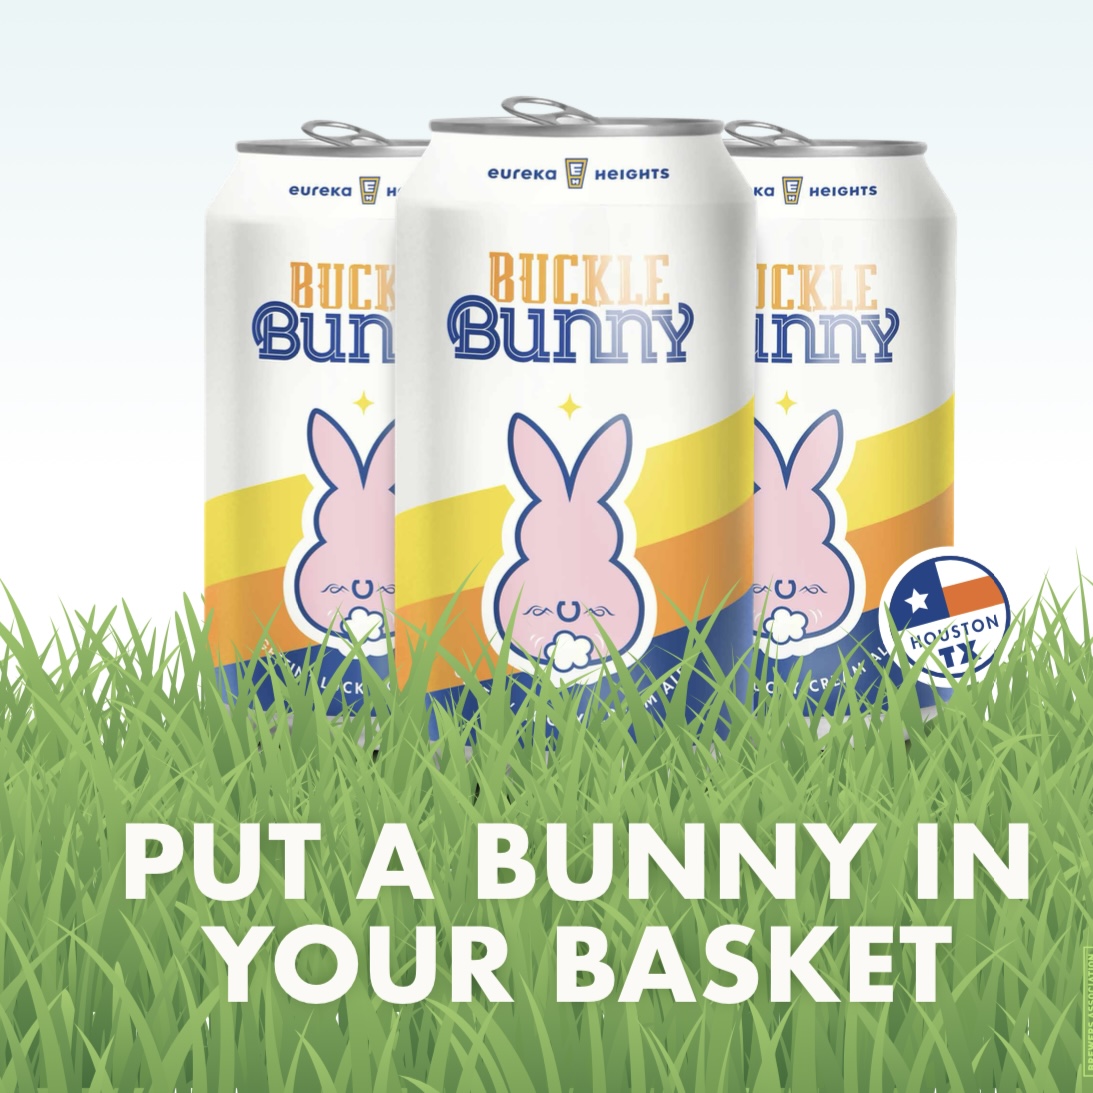 Happy Easter from the brewery with the most Bunny themed beers in all of the Heights, maybe even further. Regular hours today so that means we’re open until 8pm with Satellite of Pizza.